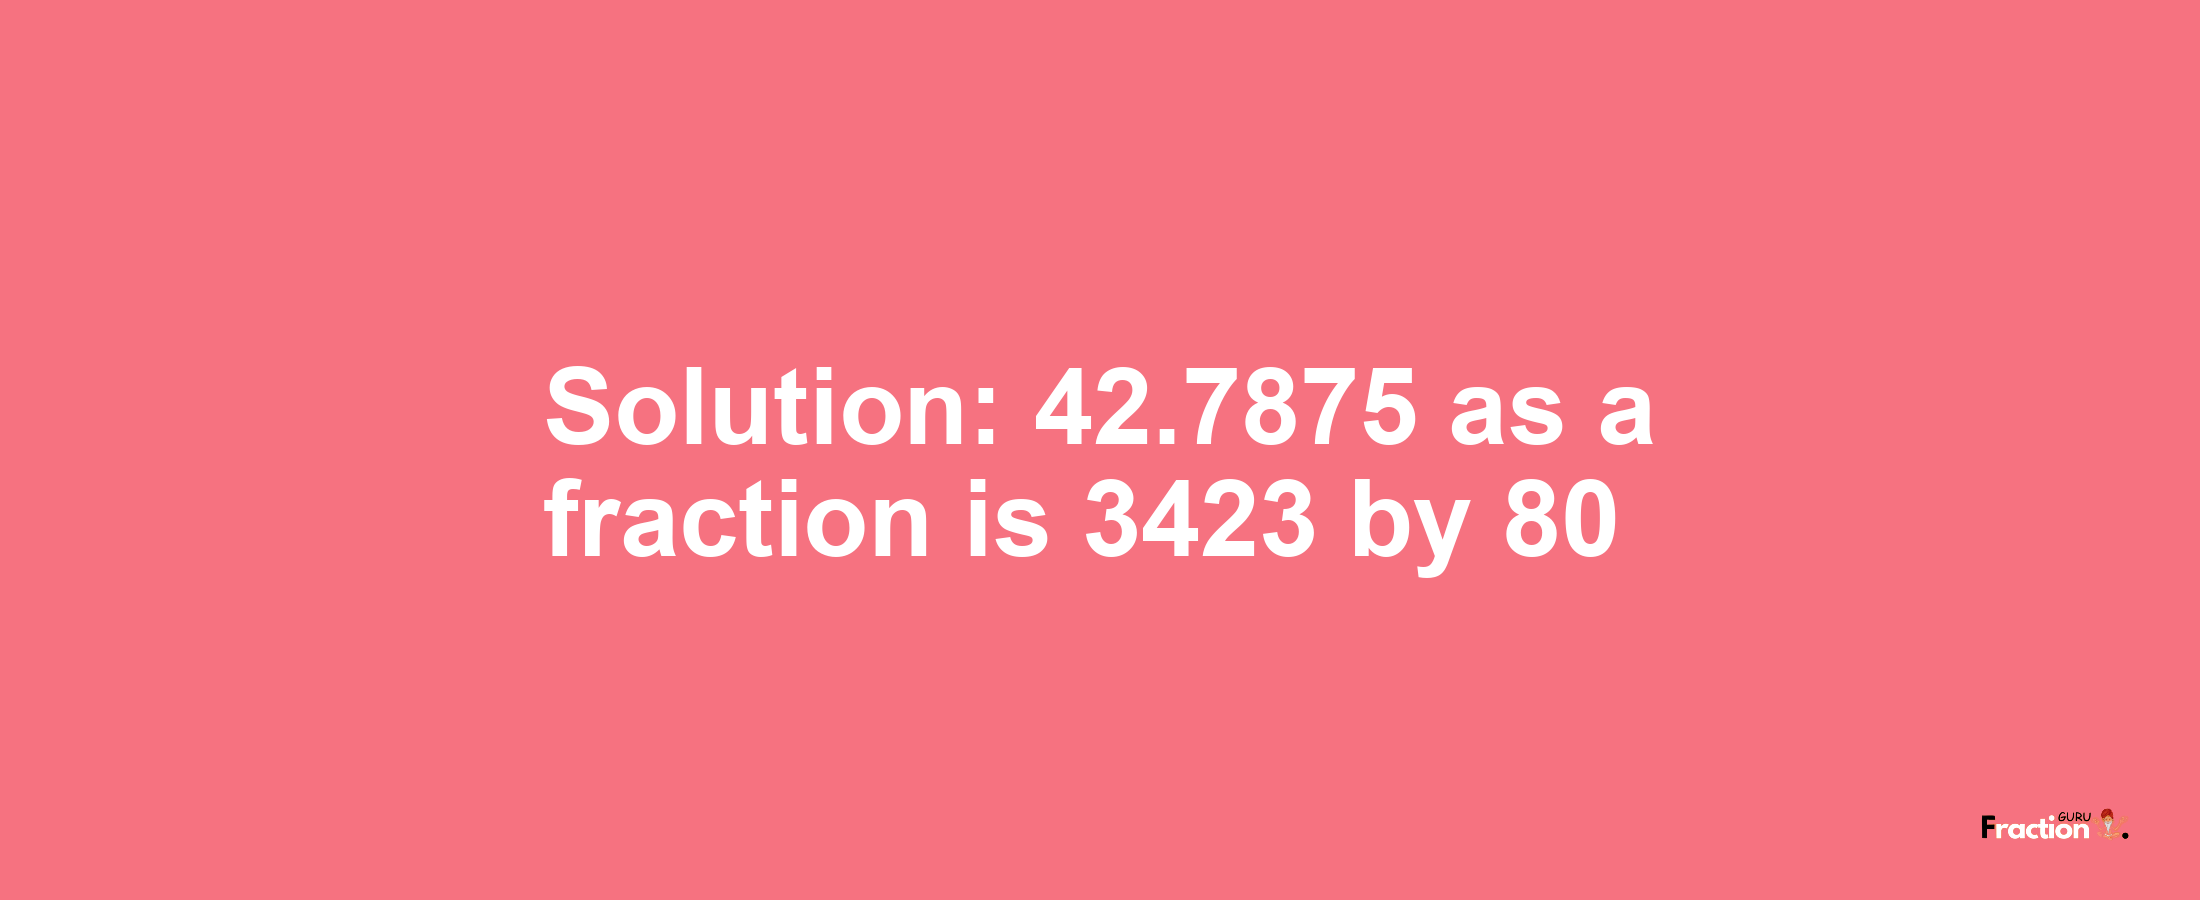 Solution:42.7875 as a fraction is 3423/80